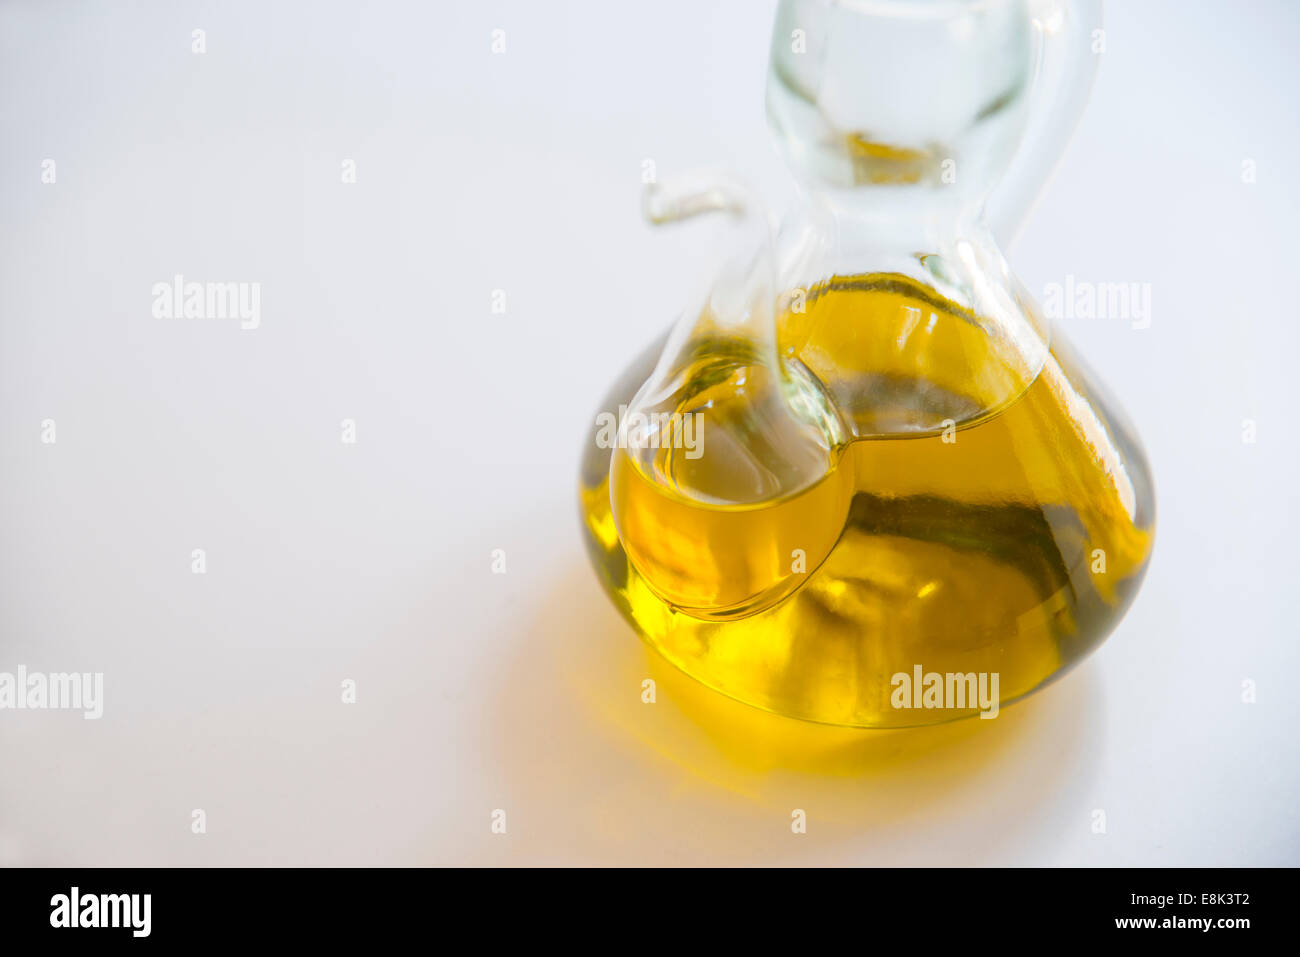 Extra virgin olive oil in oil bottle. Close view. Stock Photo